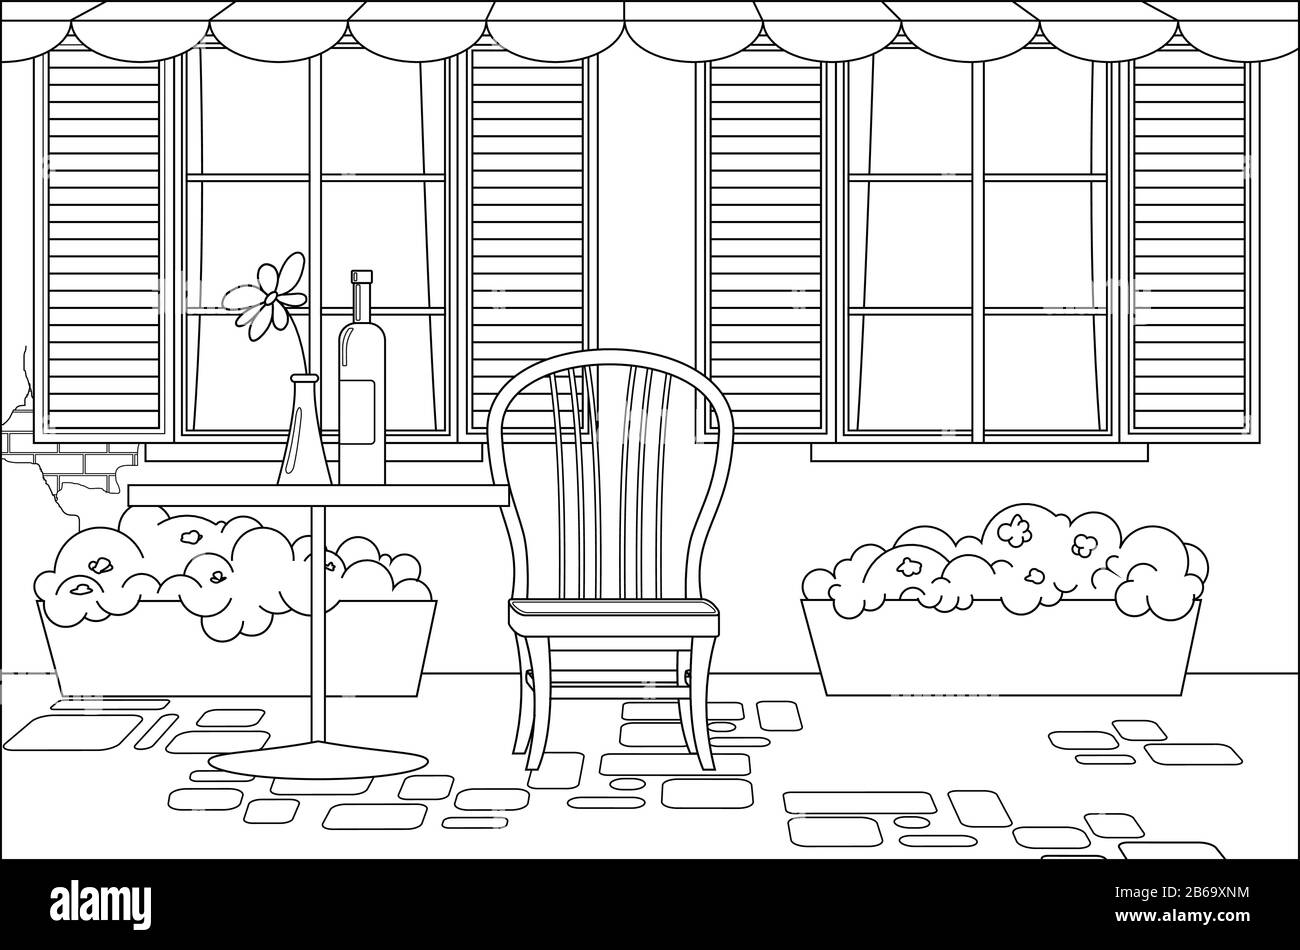 french street cafe with awning. Table and chair on the street, windows with shutters, flowers in floor flower pots; a bottle of wine on the table, a f Stock Vector